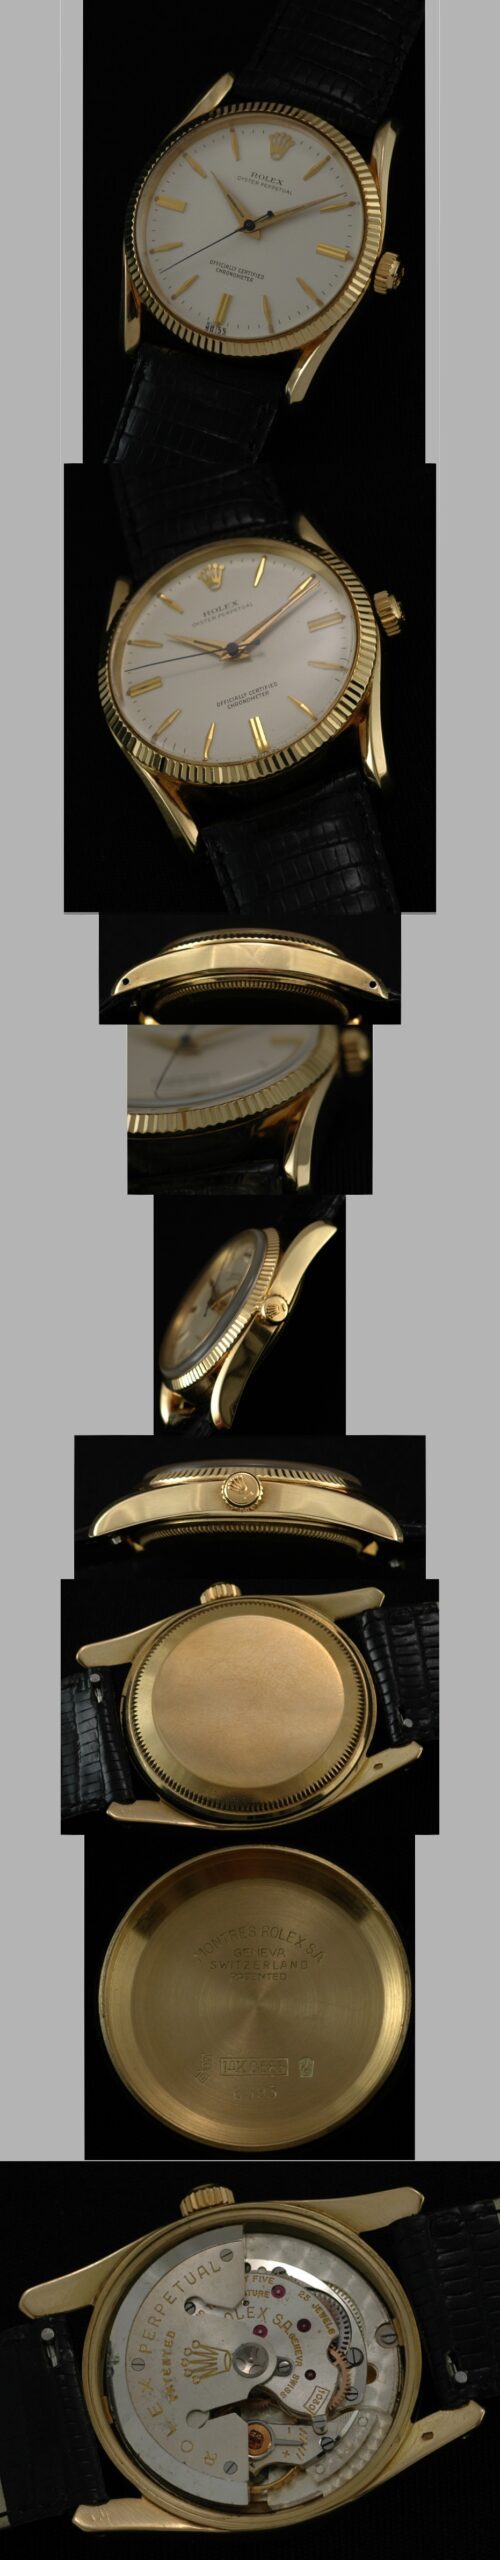 1958 Rolex Oyster Perpetual 14k gold watch with original fluted bezel, winding crown, bombe lugs, lance hands, and caliber 1030 movement.